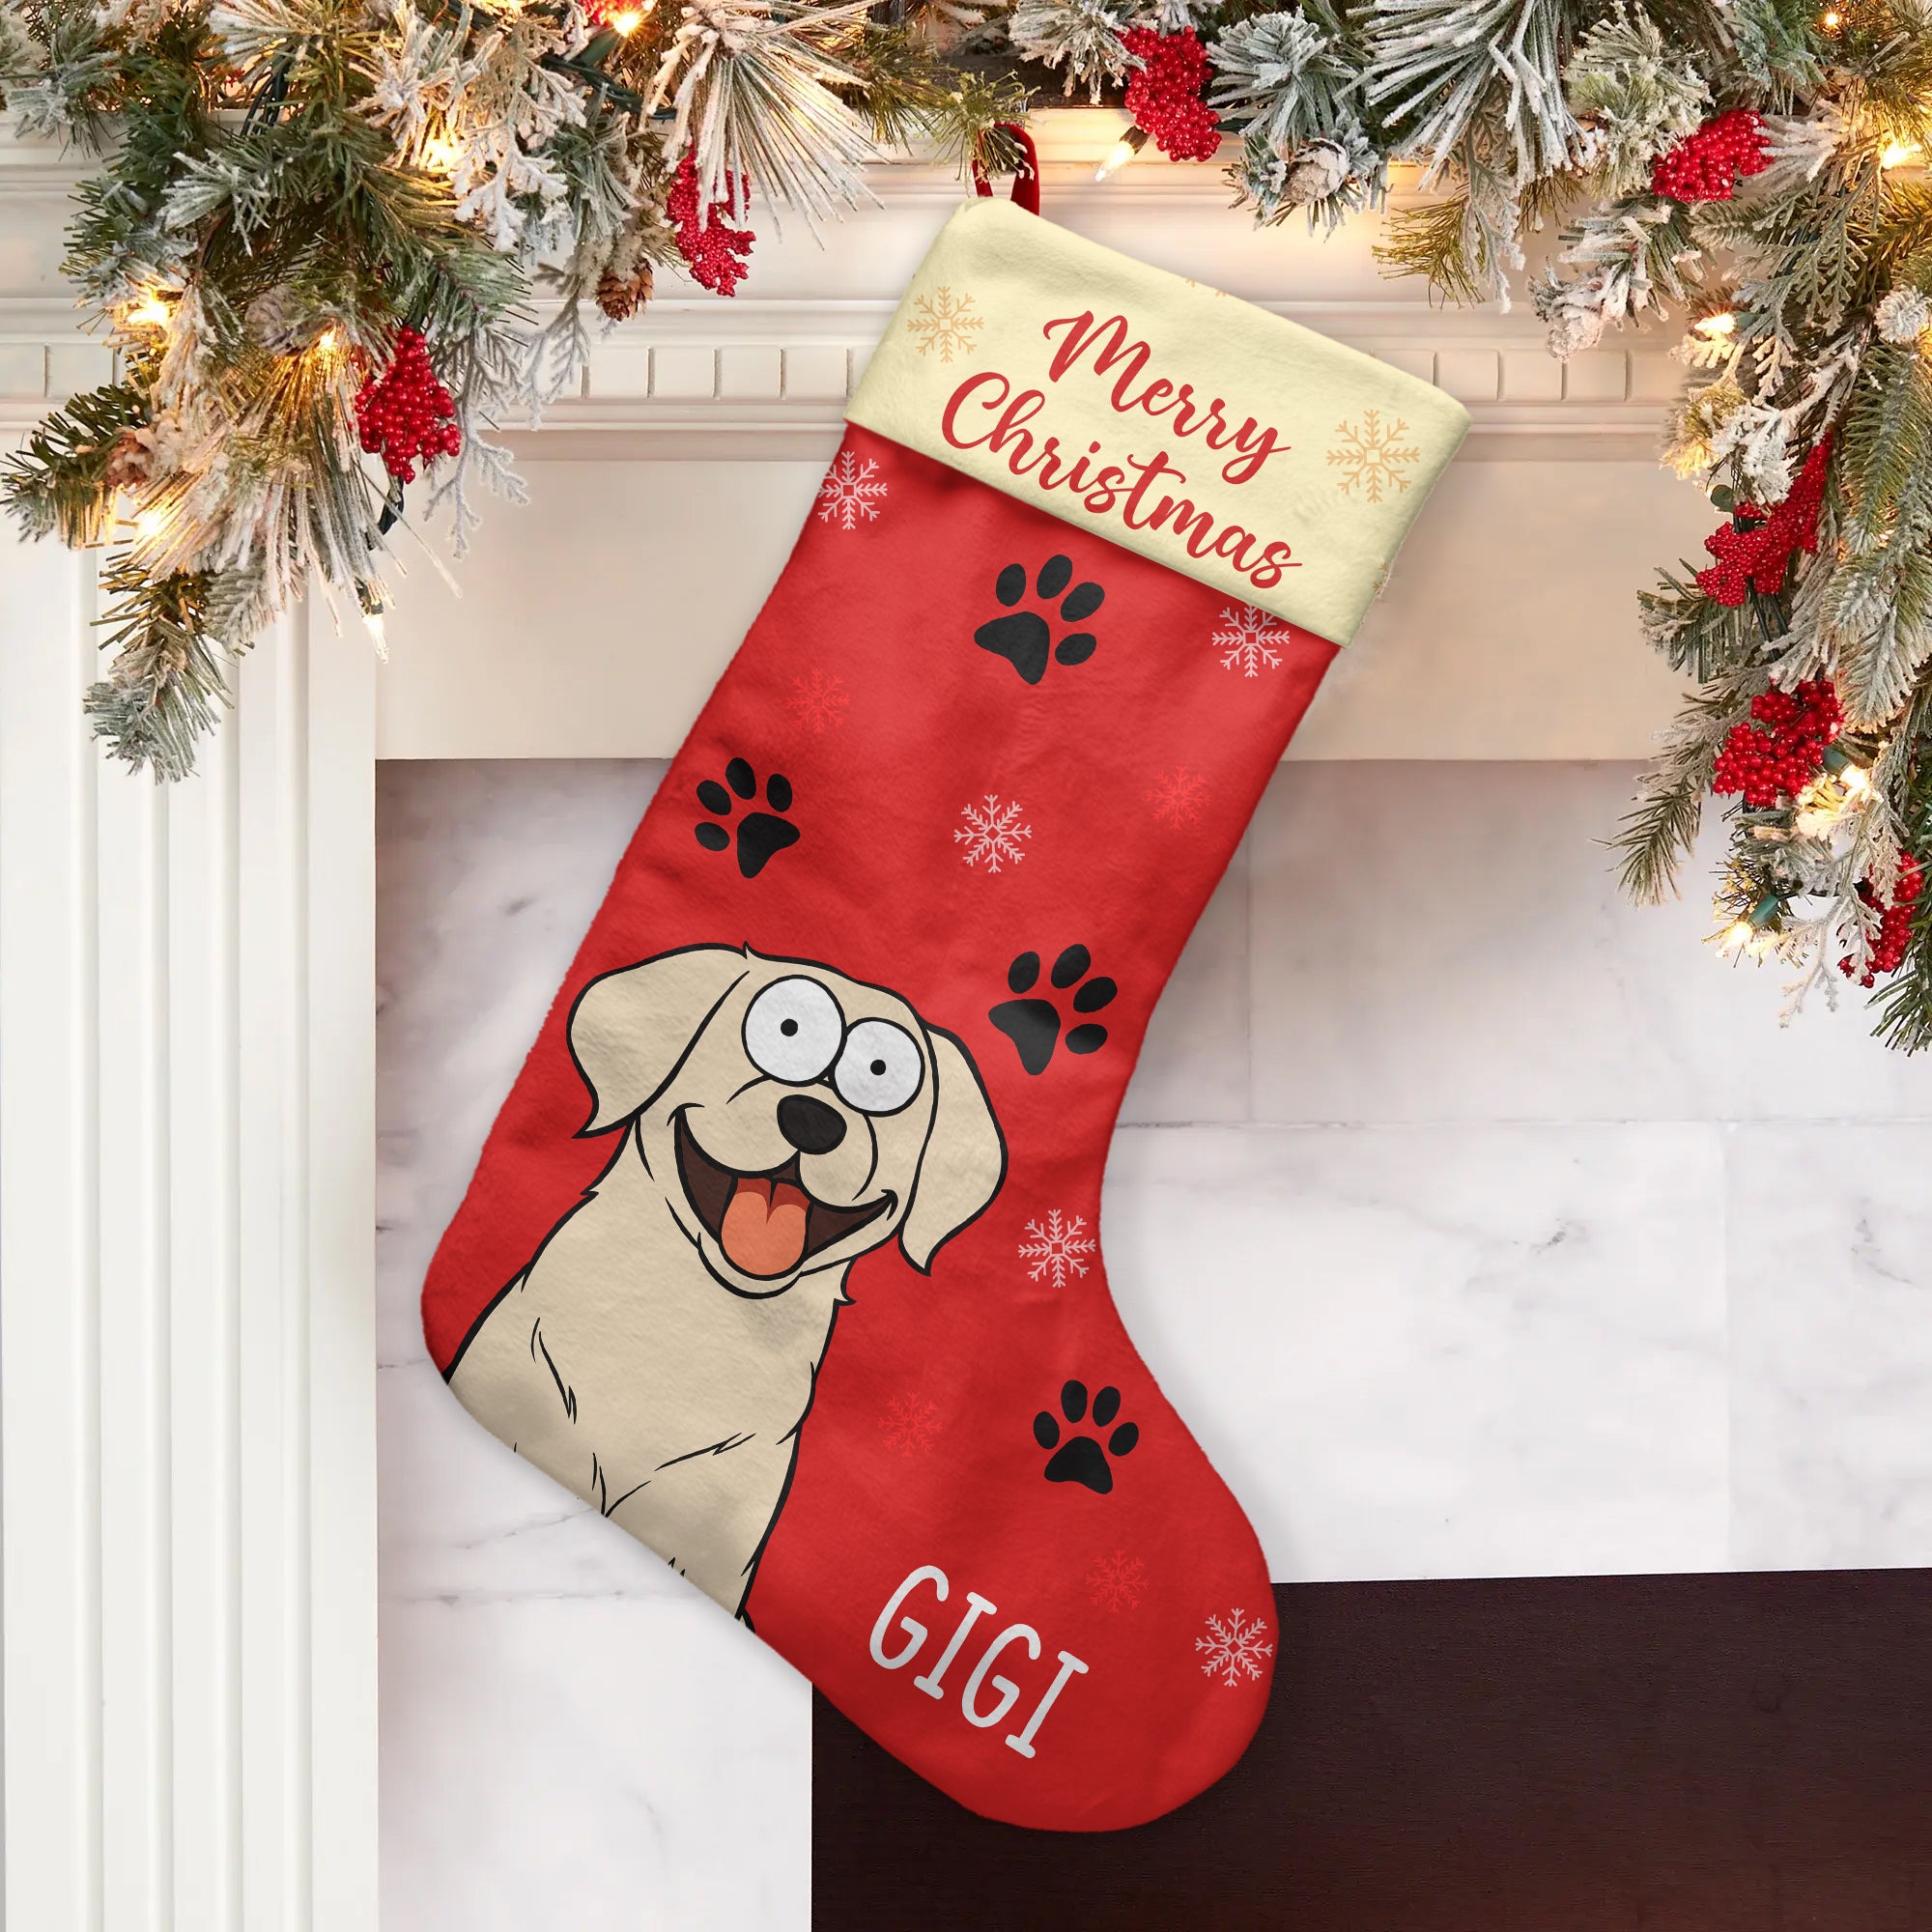 Merry Christmas - Personalized Stocking